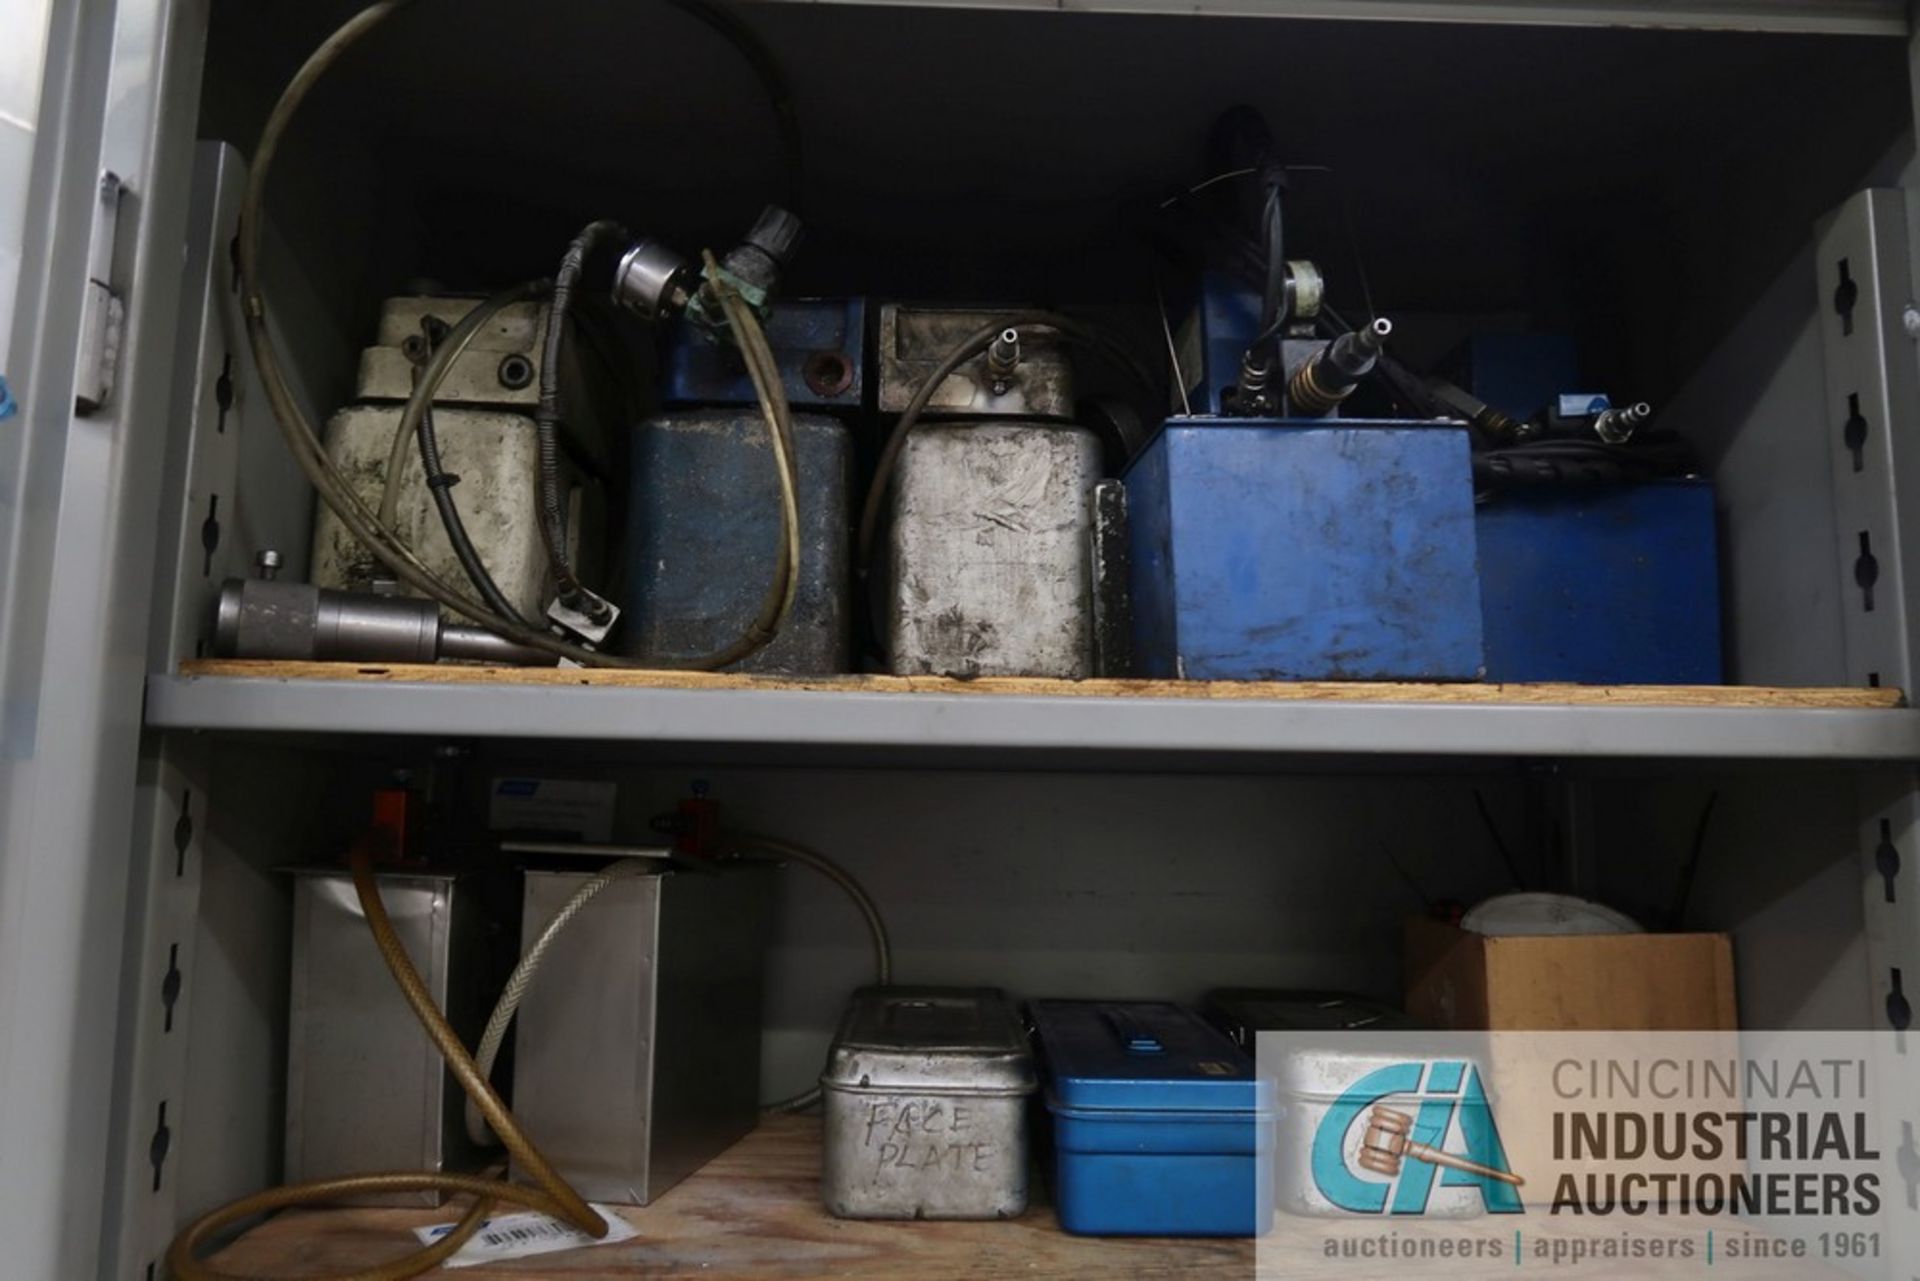 (LOT) MISCELLANEOUS MACHINE ACCESSORIES AND SHOP EQUIPMENT WITH LYON STORAGE CABINET - Image 3 of 5